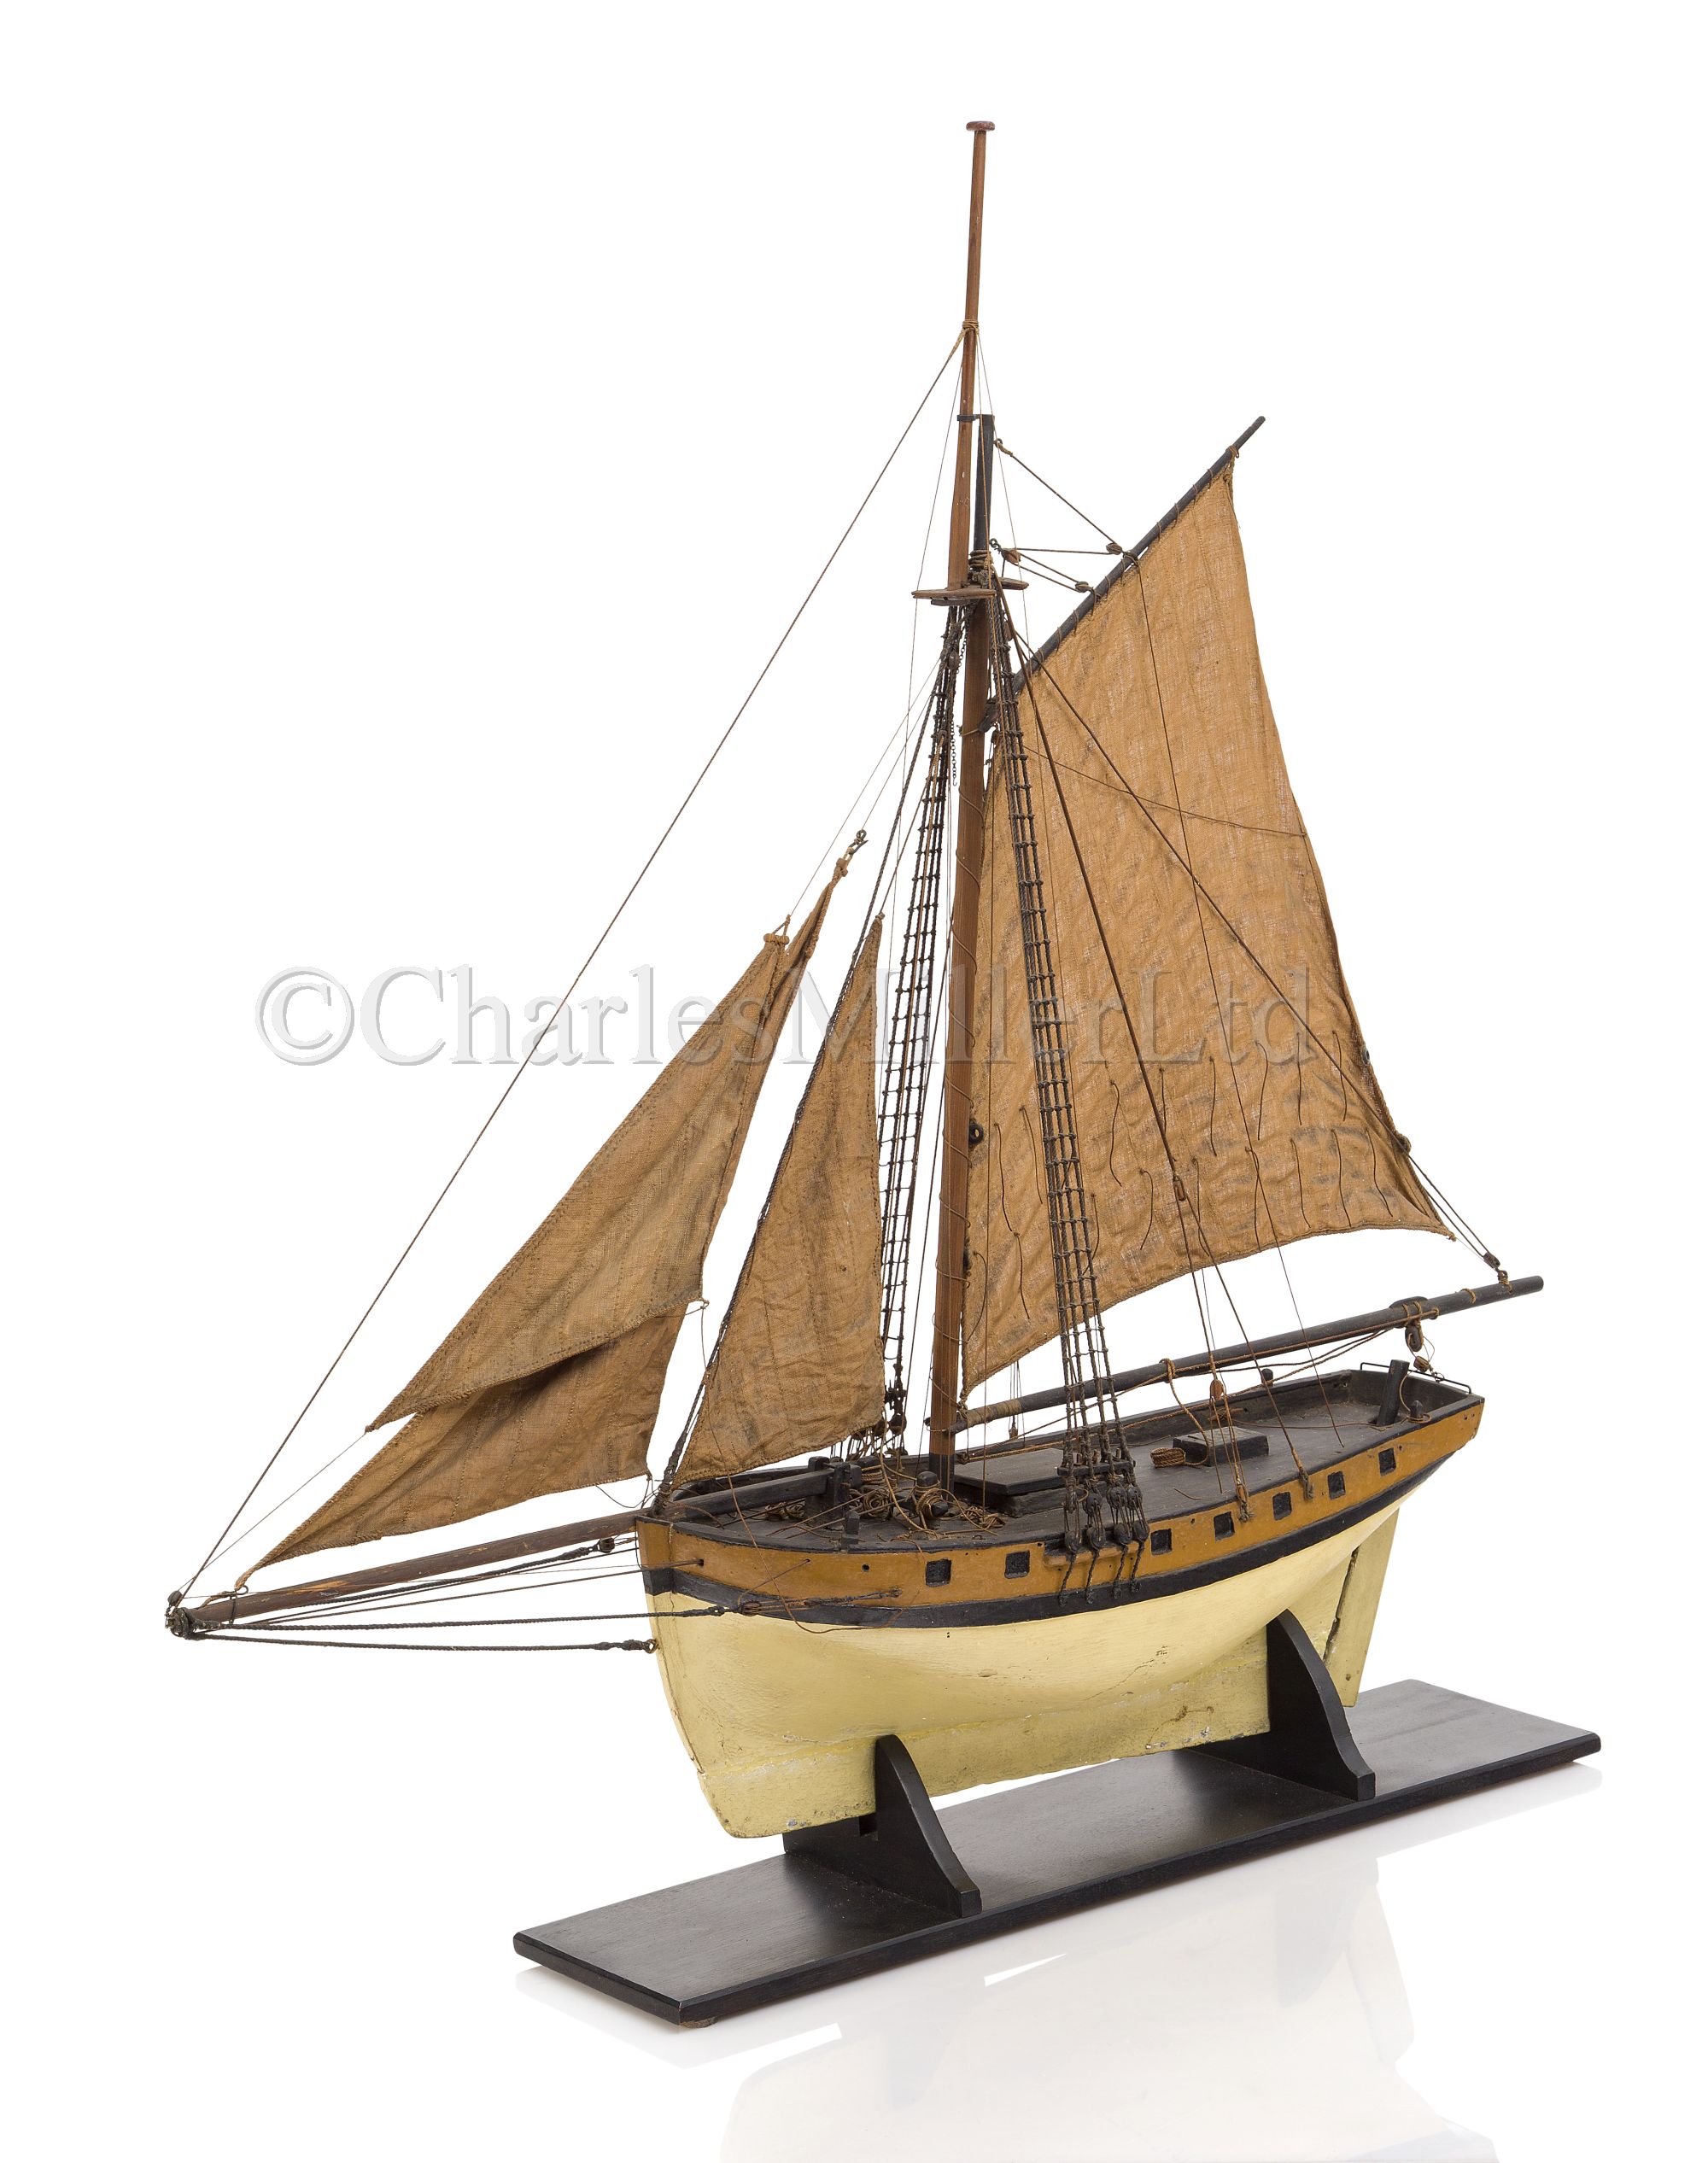 AN ATTRACTIVE LATE 18TH/EARLY 19TH CENTURY SAILING MODEL OF A CUTTER